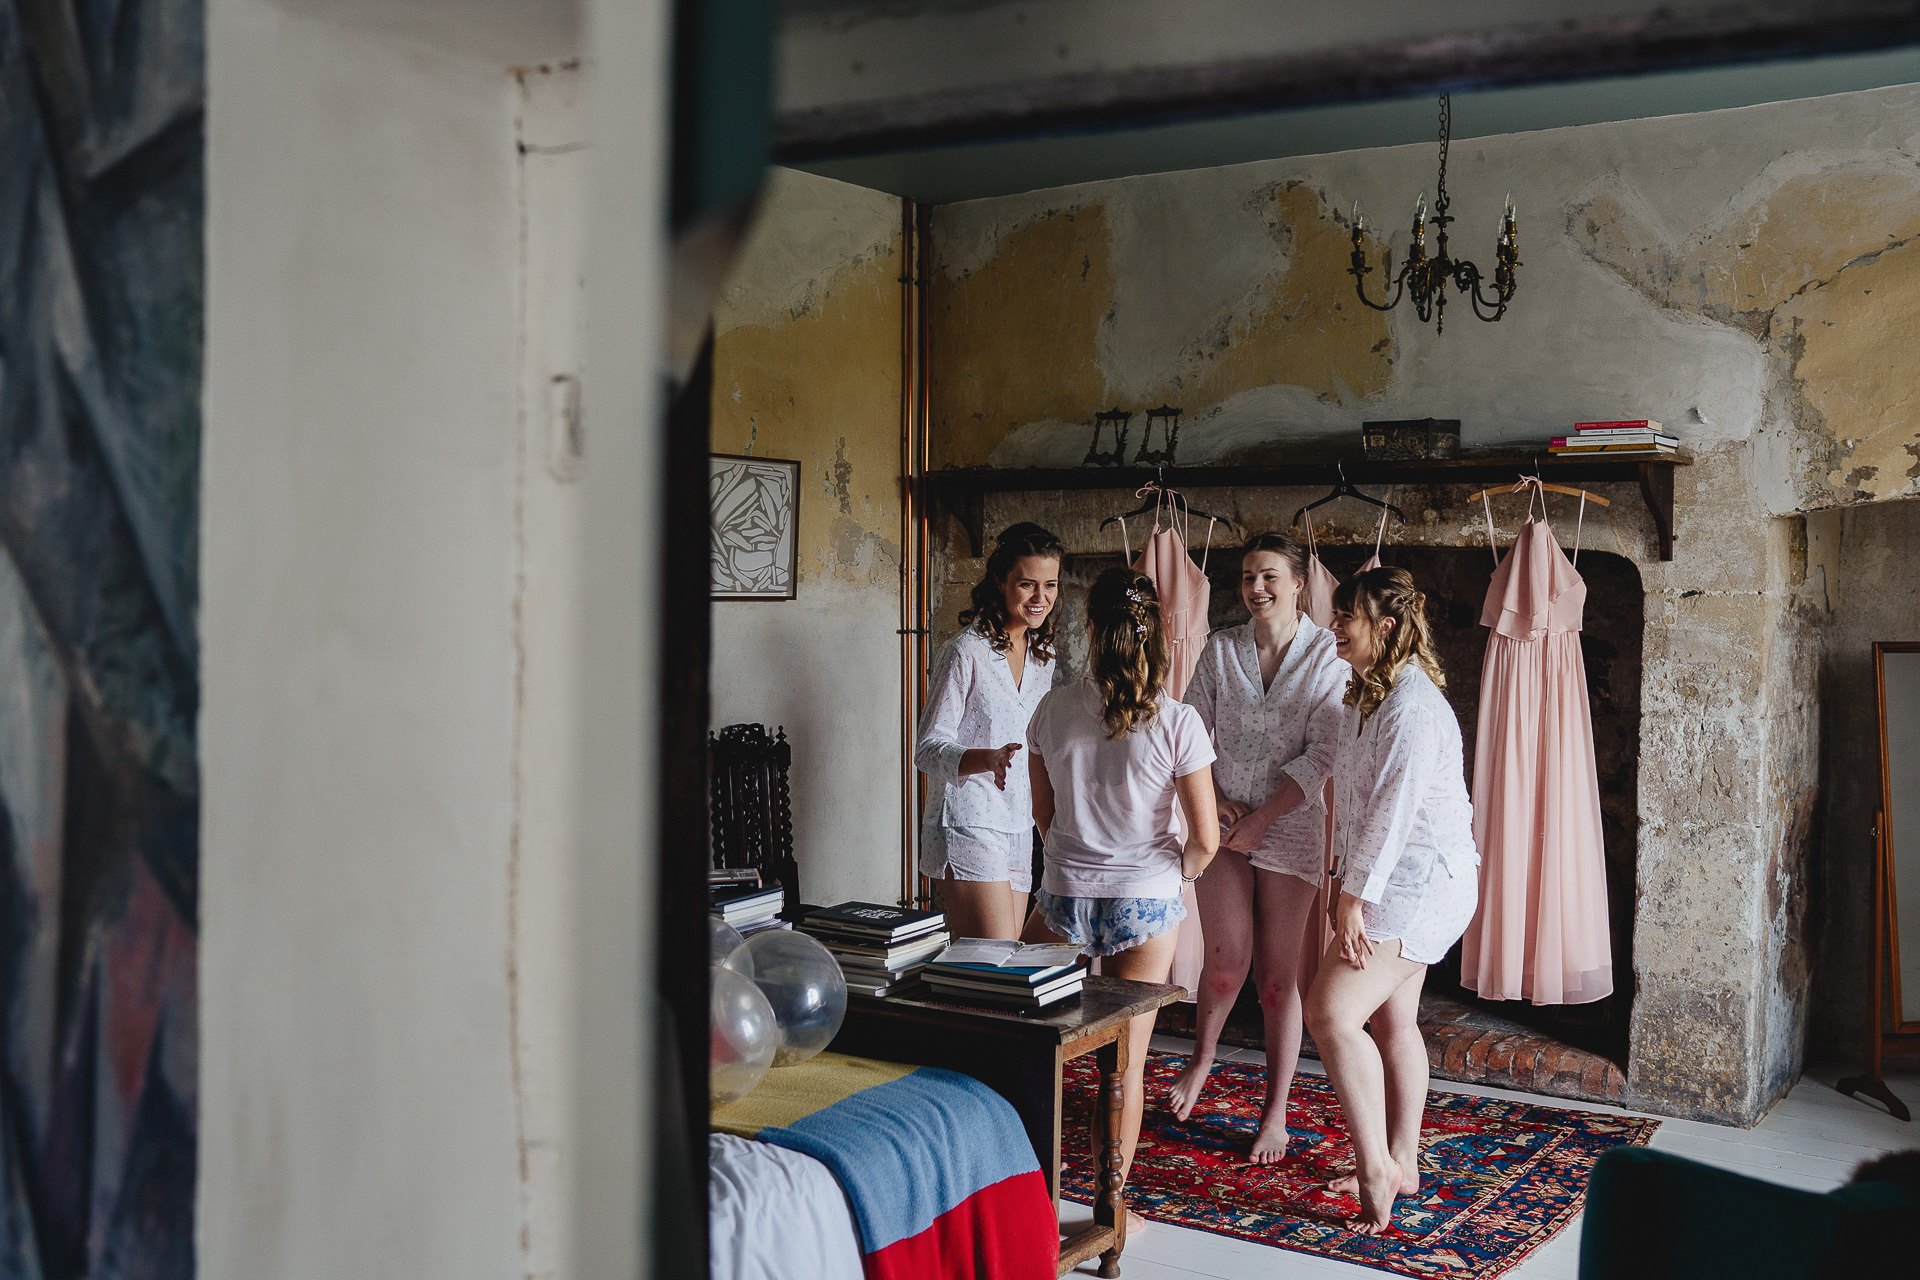 Group of women laughing together in pyjamas